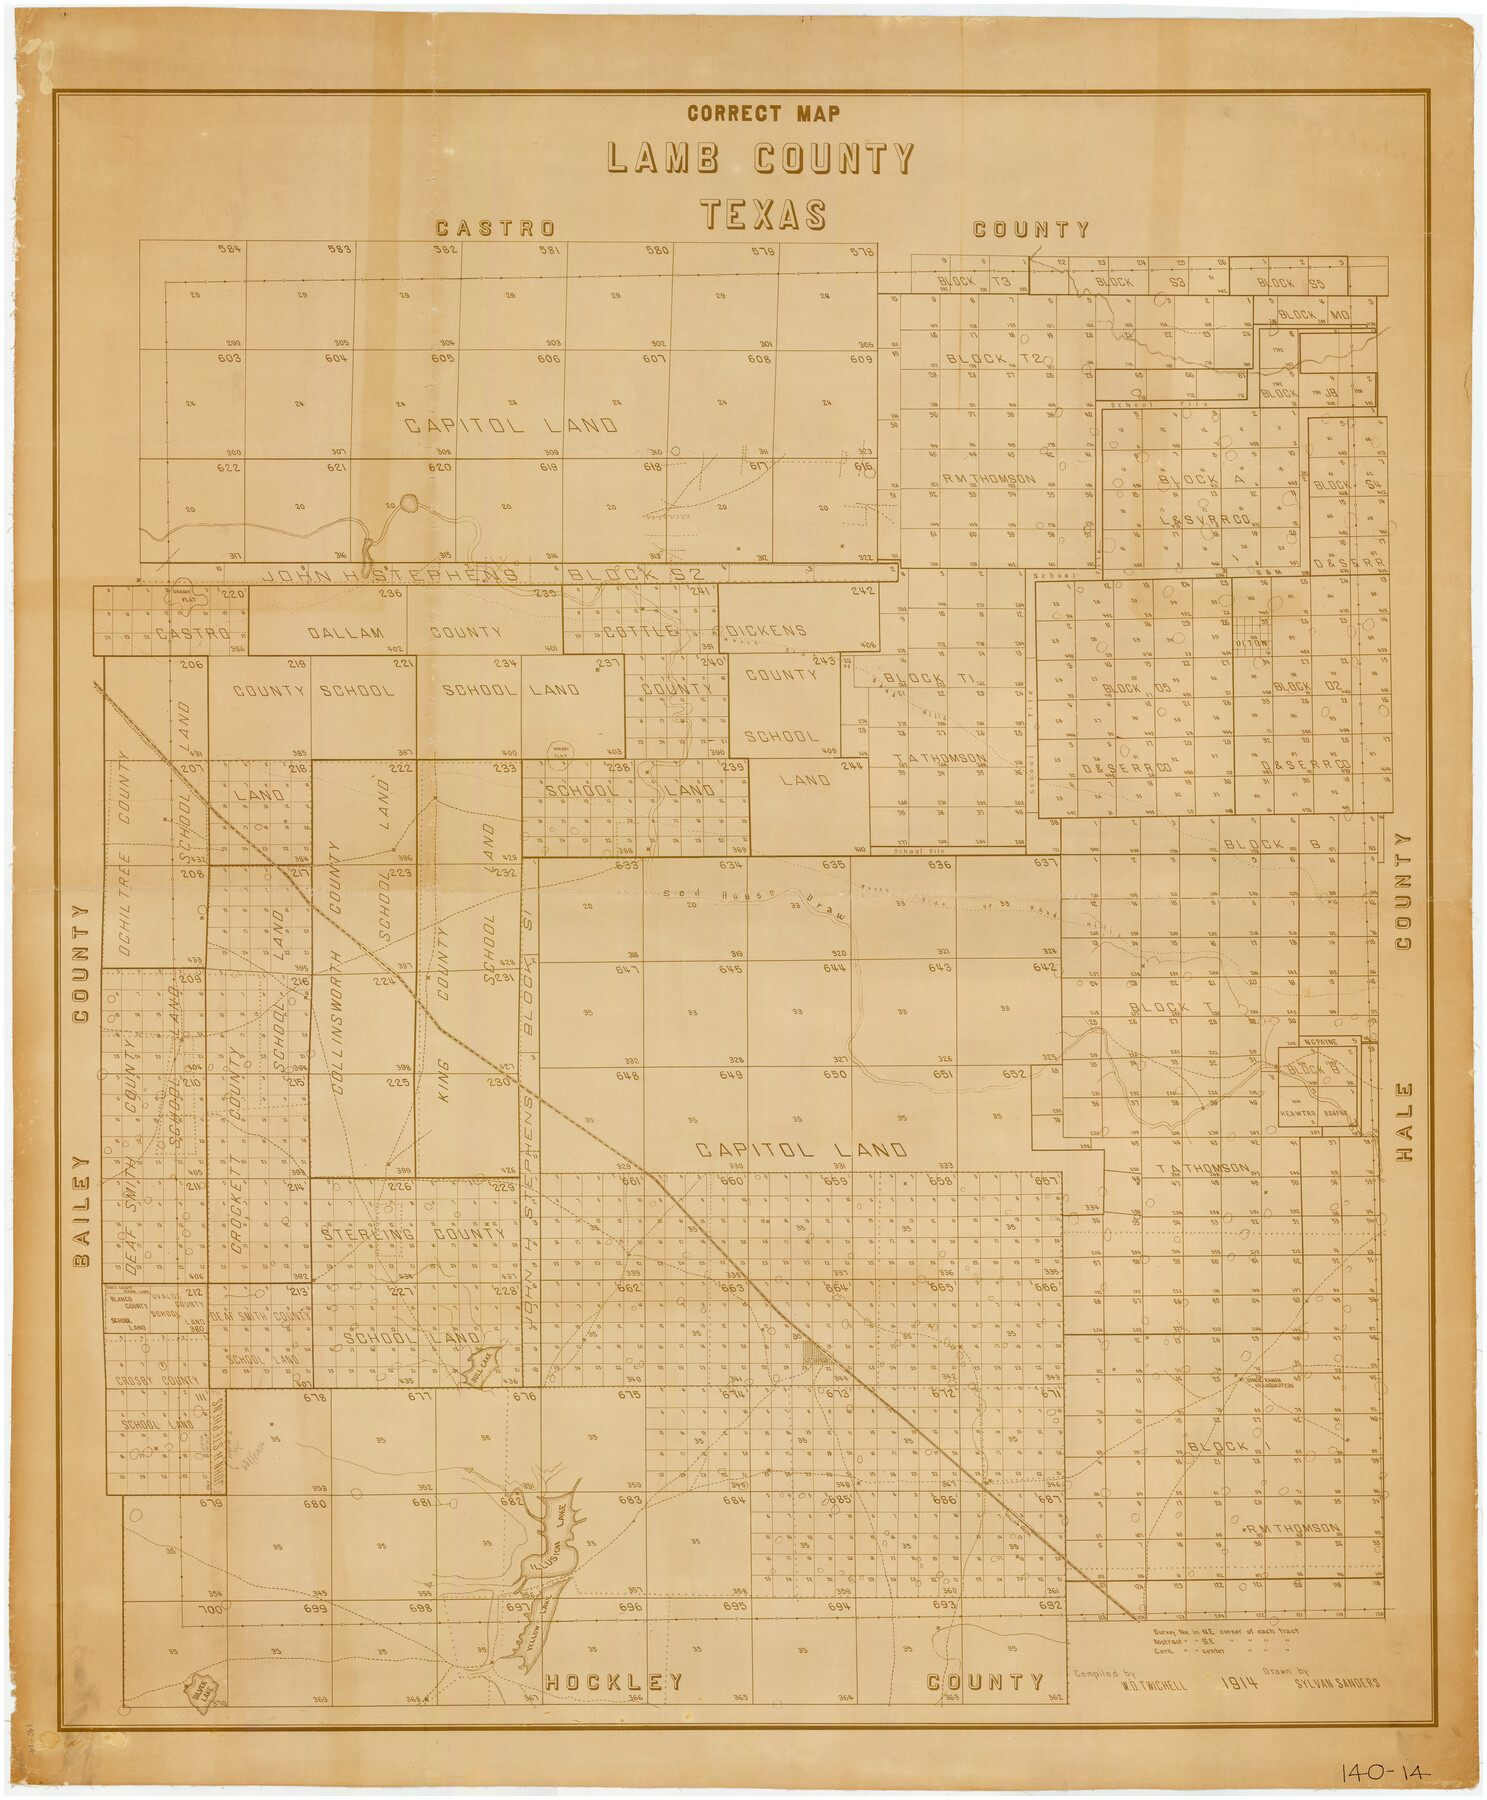 89954, Correct Map of Lamb County, Texas, Twichell Survey Records